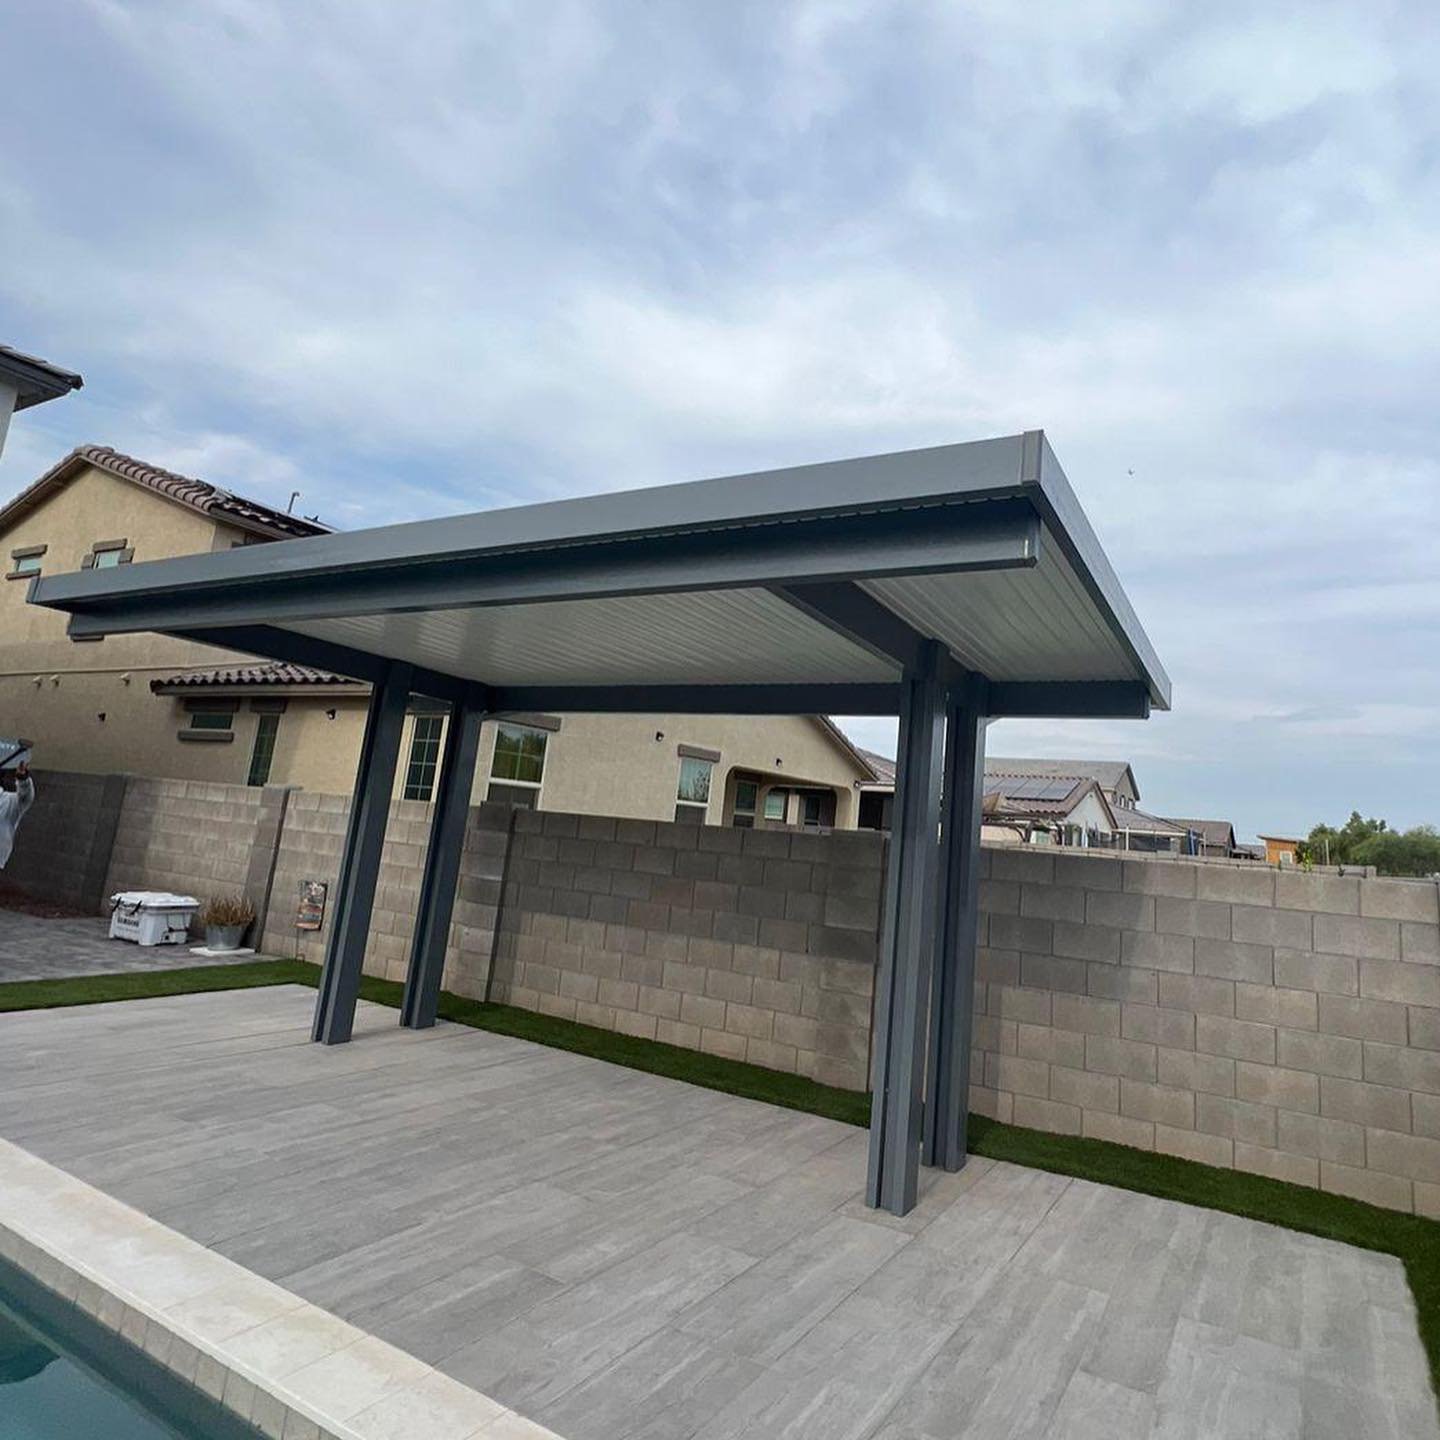 Solid Flat Pan Cover Services, Outshine Patio Cover near Goodyear AZ